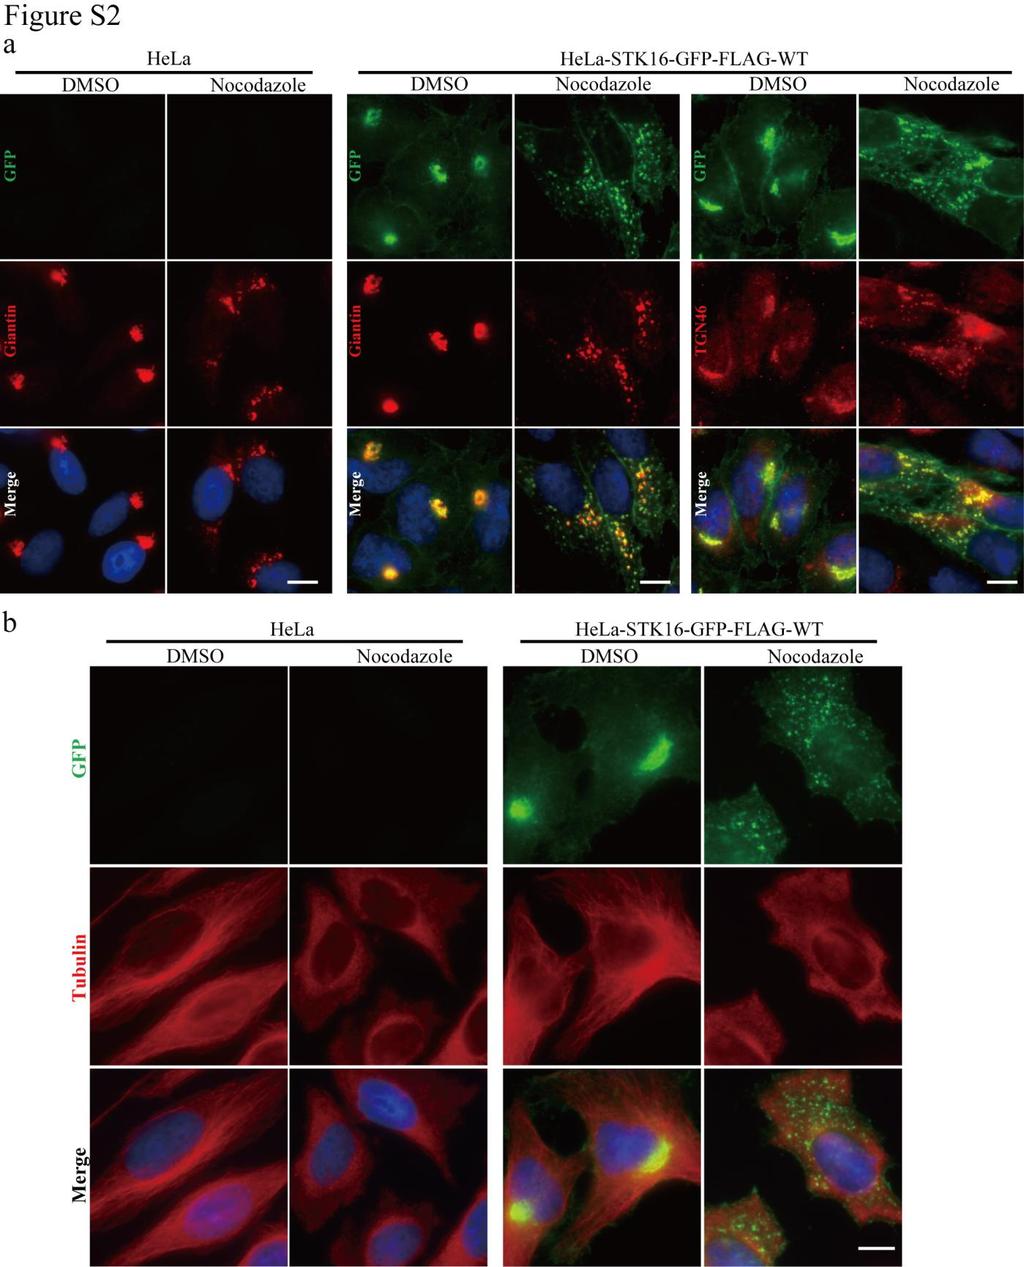 Figure S2. STK16 colocalizes with Golgi and TGN markers in Nocodazole-treated cells.